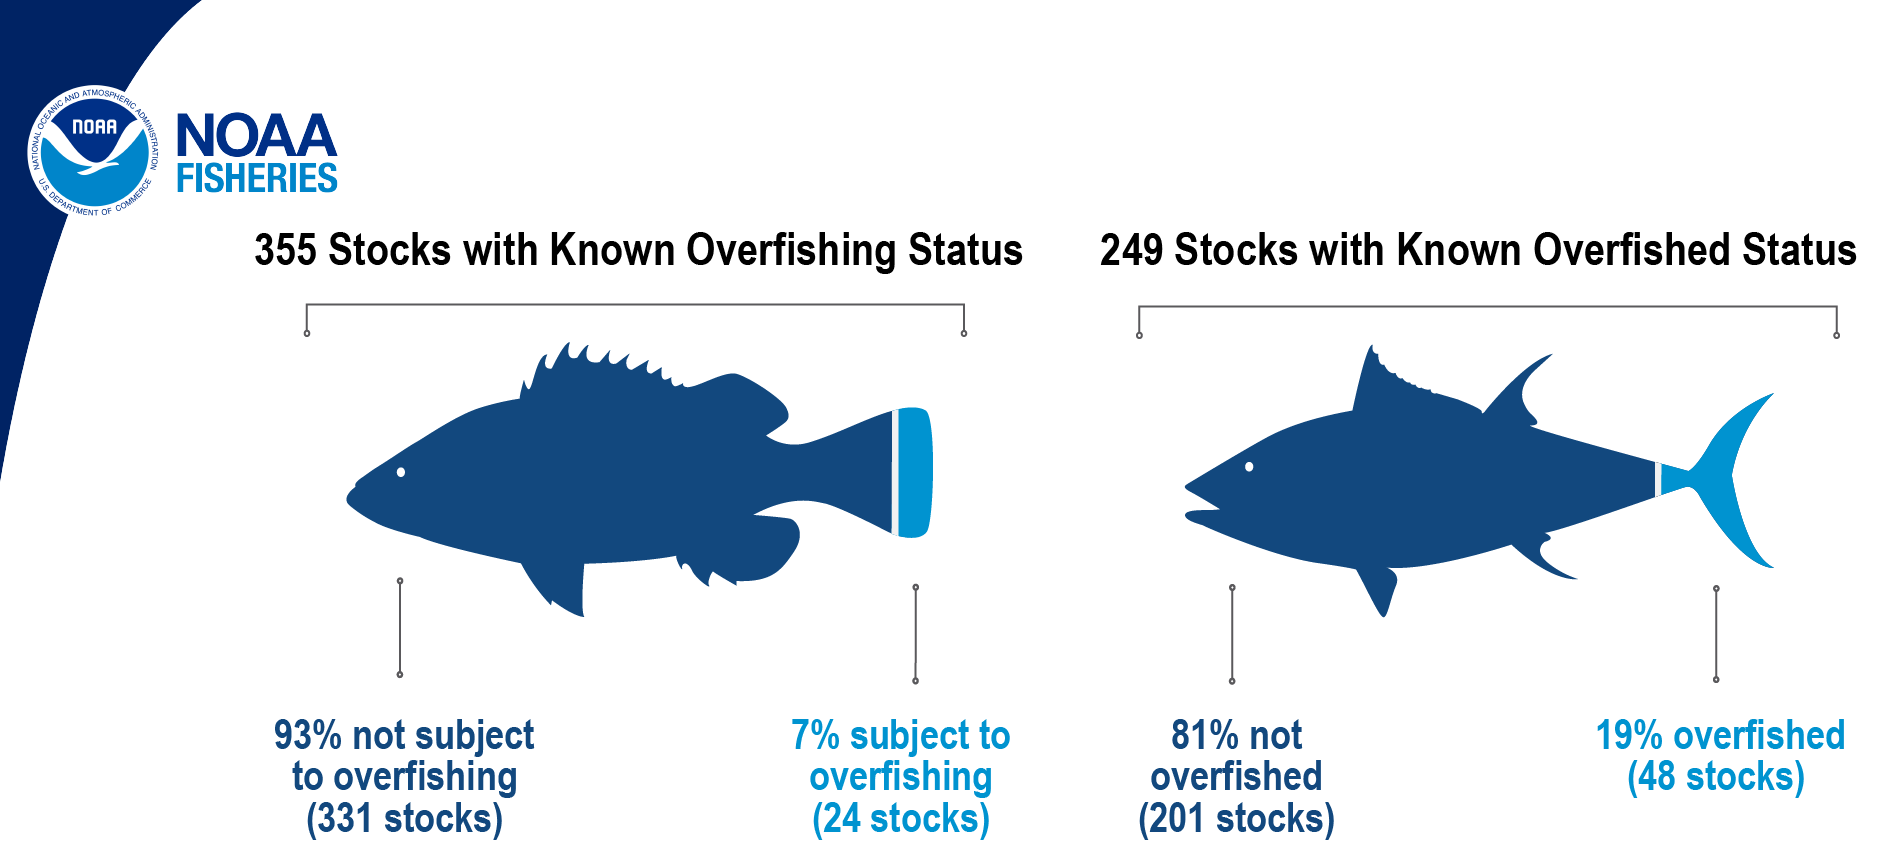 Image shows that of the more than 490 stocks managed by NOAA, 355 have a known overfishing status (331 not subject to overfishing and 24 subject to overfishing) and 249 have a known overfished status (201 not overfished and 48 overfished).